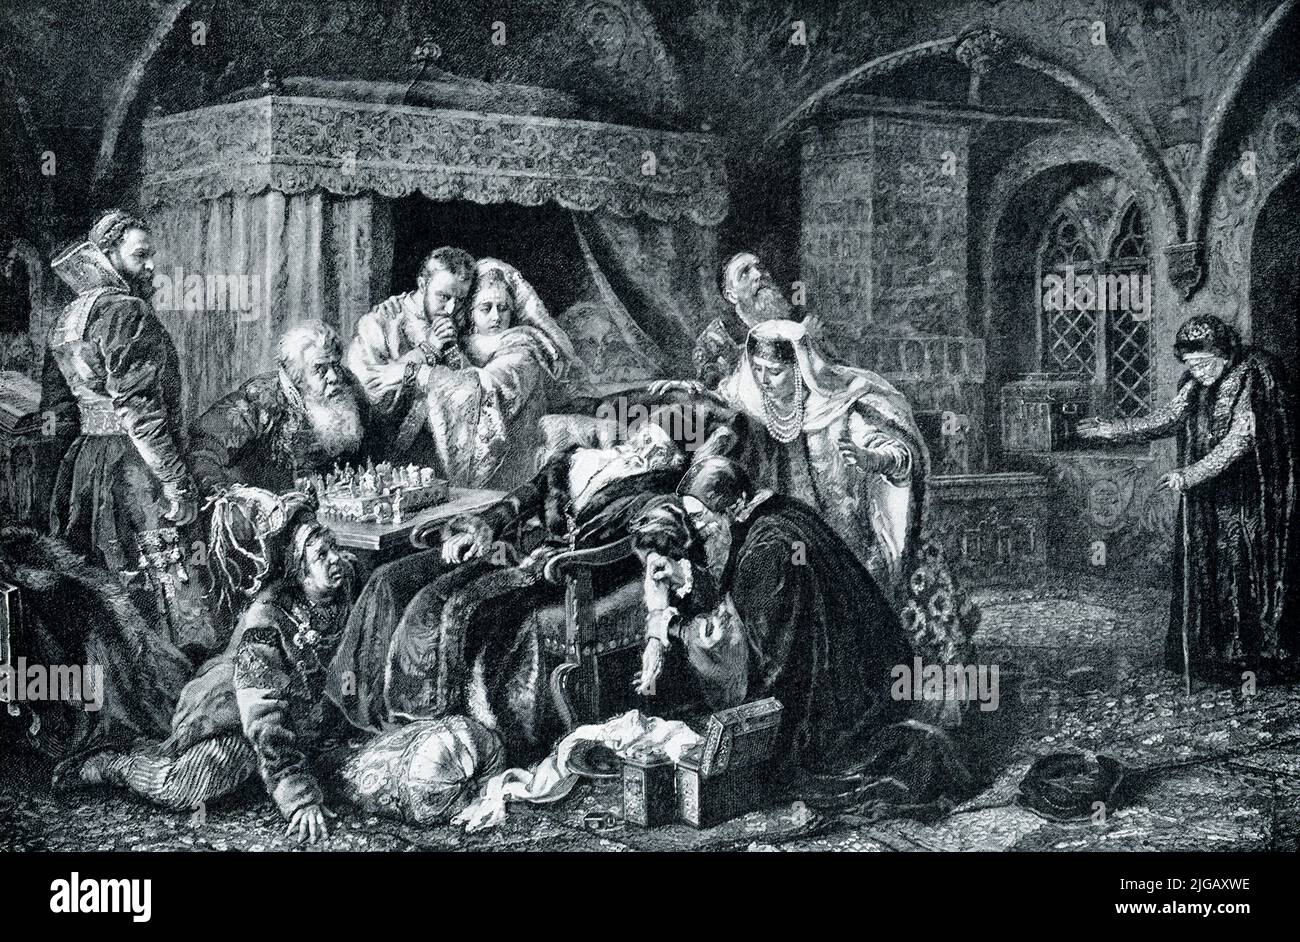 The 1906 caption reads “DEATH OF IVAN THE TERRIBLE.—This hideous tyrant in one of his rages slew his eldest and favorite son. Remorse for the deed weighed on him, he became subject to fainting spells, and finally expired in one of these. He had just interrupted a game of chess to berate his only surviving son, a half imbecile; and it may have been the mingled rage and despair at this incapable heir which overpowered the monarch. His son, protected able woman to whom he had been wedded, stares helplessly at his dying parent.” Ivan IV Vasilyevich, commonly known in English as Ivan the Terrible, Stock Photo